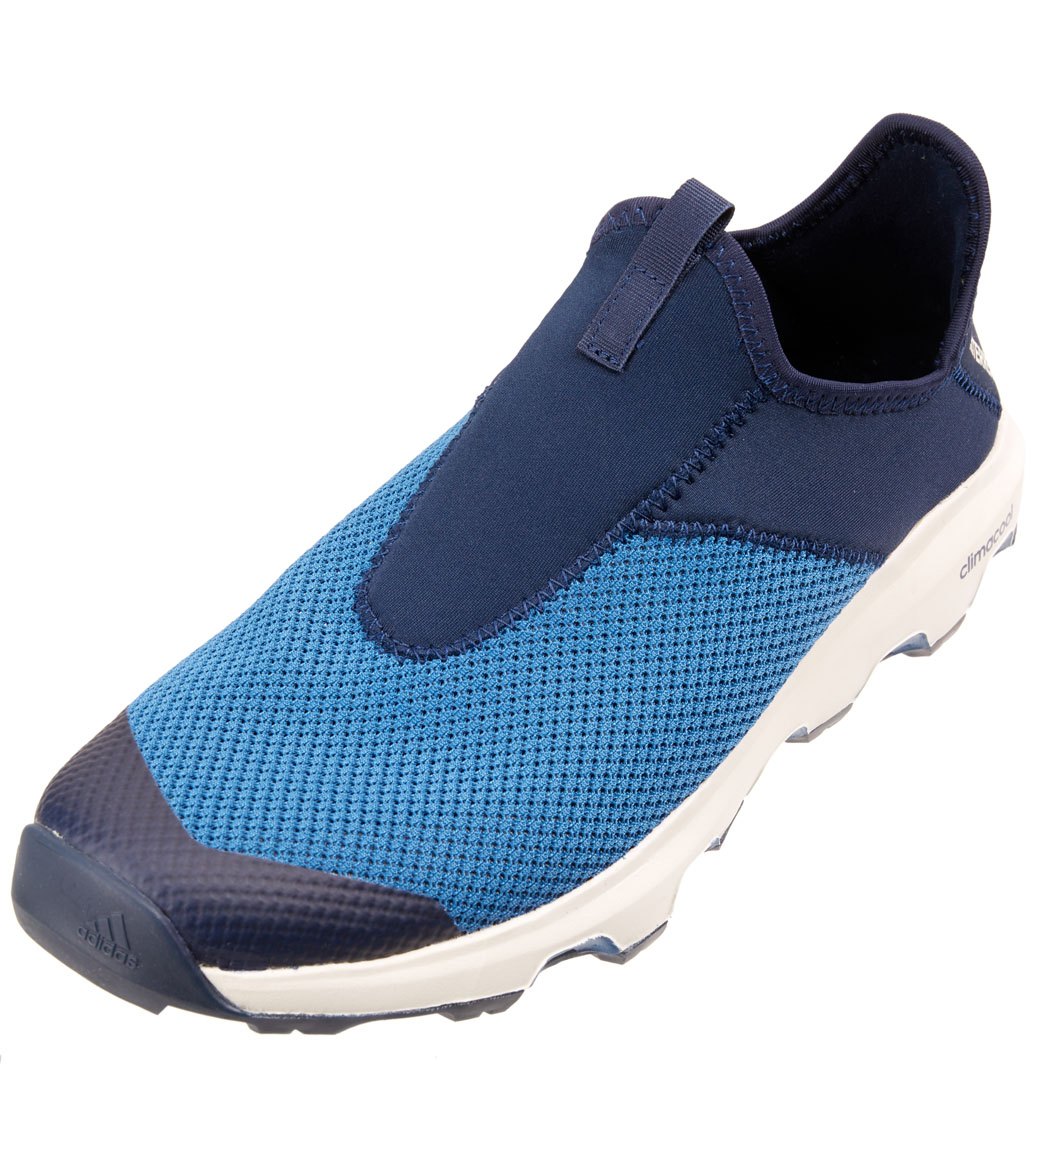 Adidas Men's Terrex Climacool Voyager Slip On Water Shoe at SwimOutlet.com